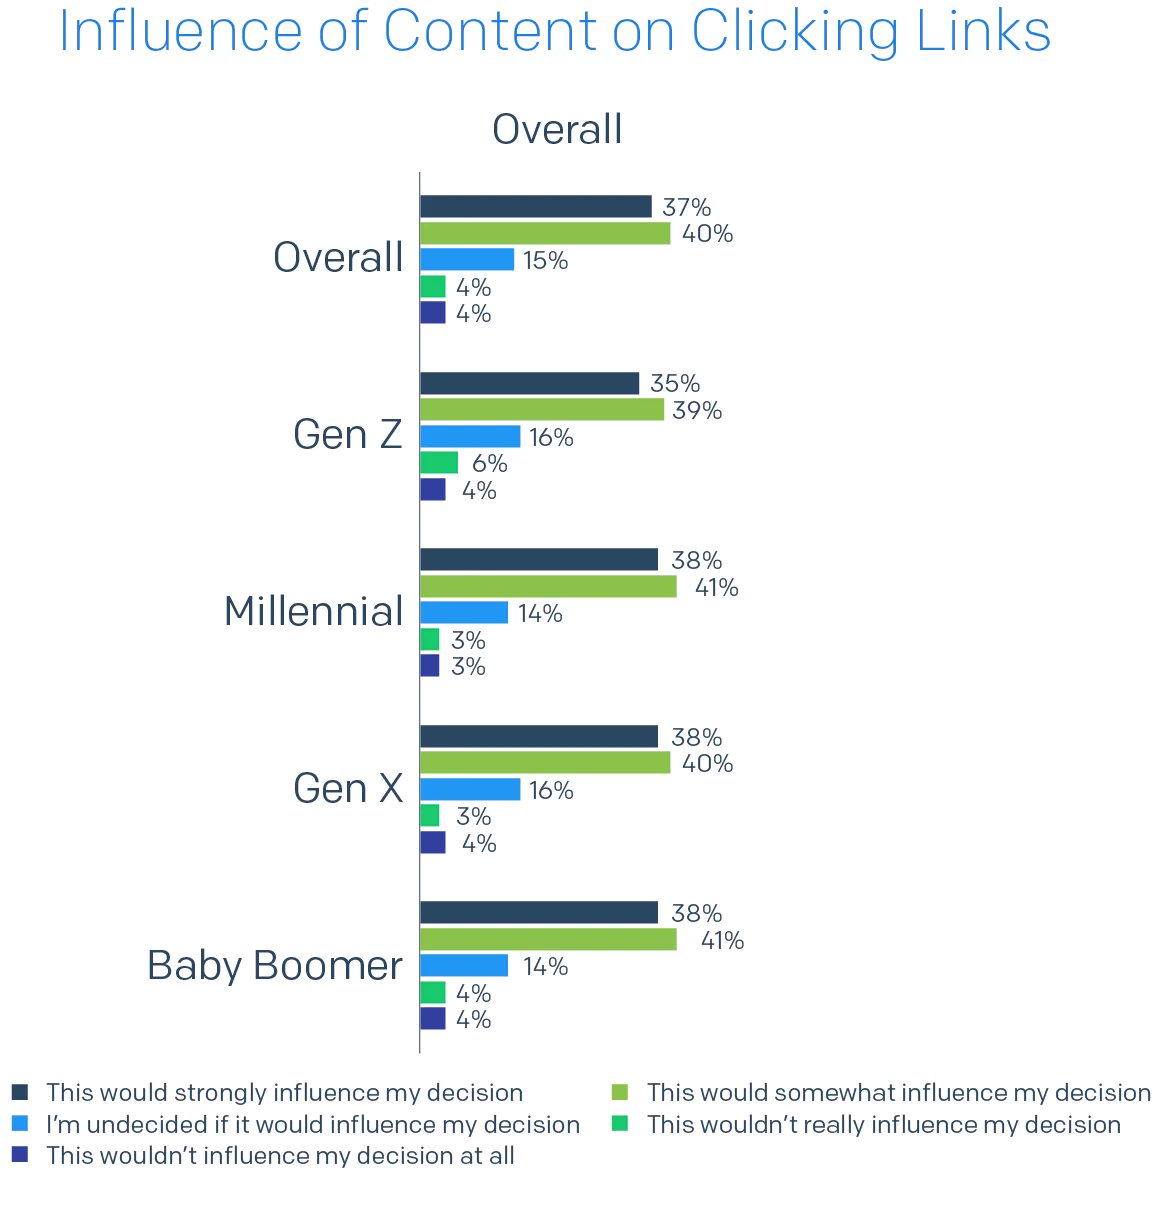 Bar chart of Influence of Content on Clicking Links